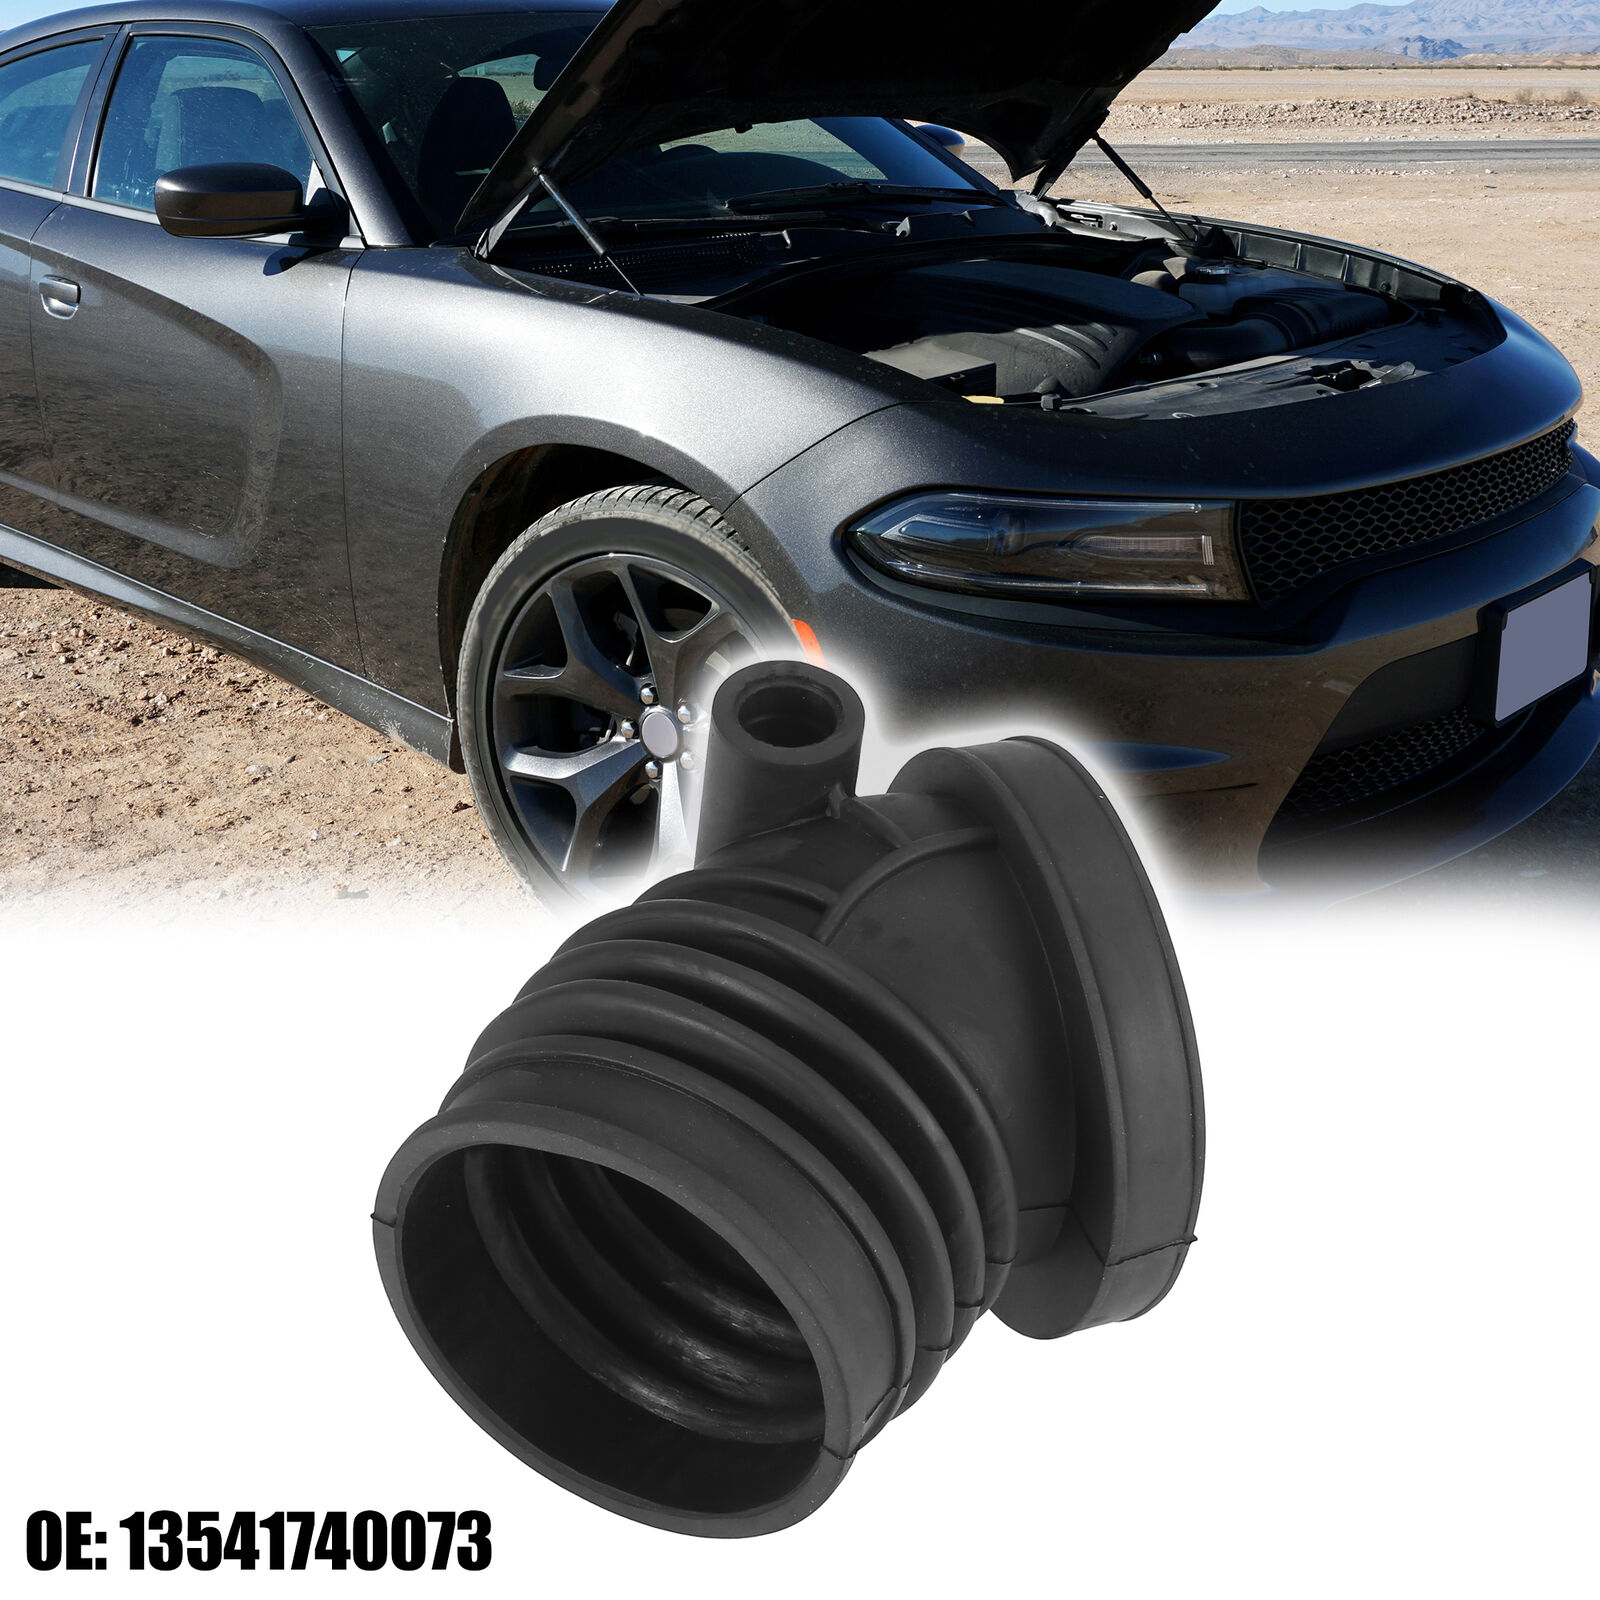 13541740073 Car Engine Air Intake Boot Hose for BMW 323is M3 328i Z3 328is 323i